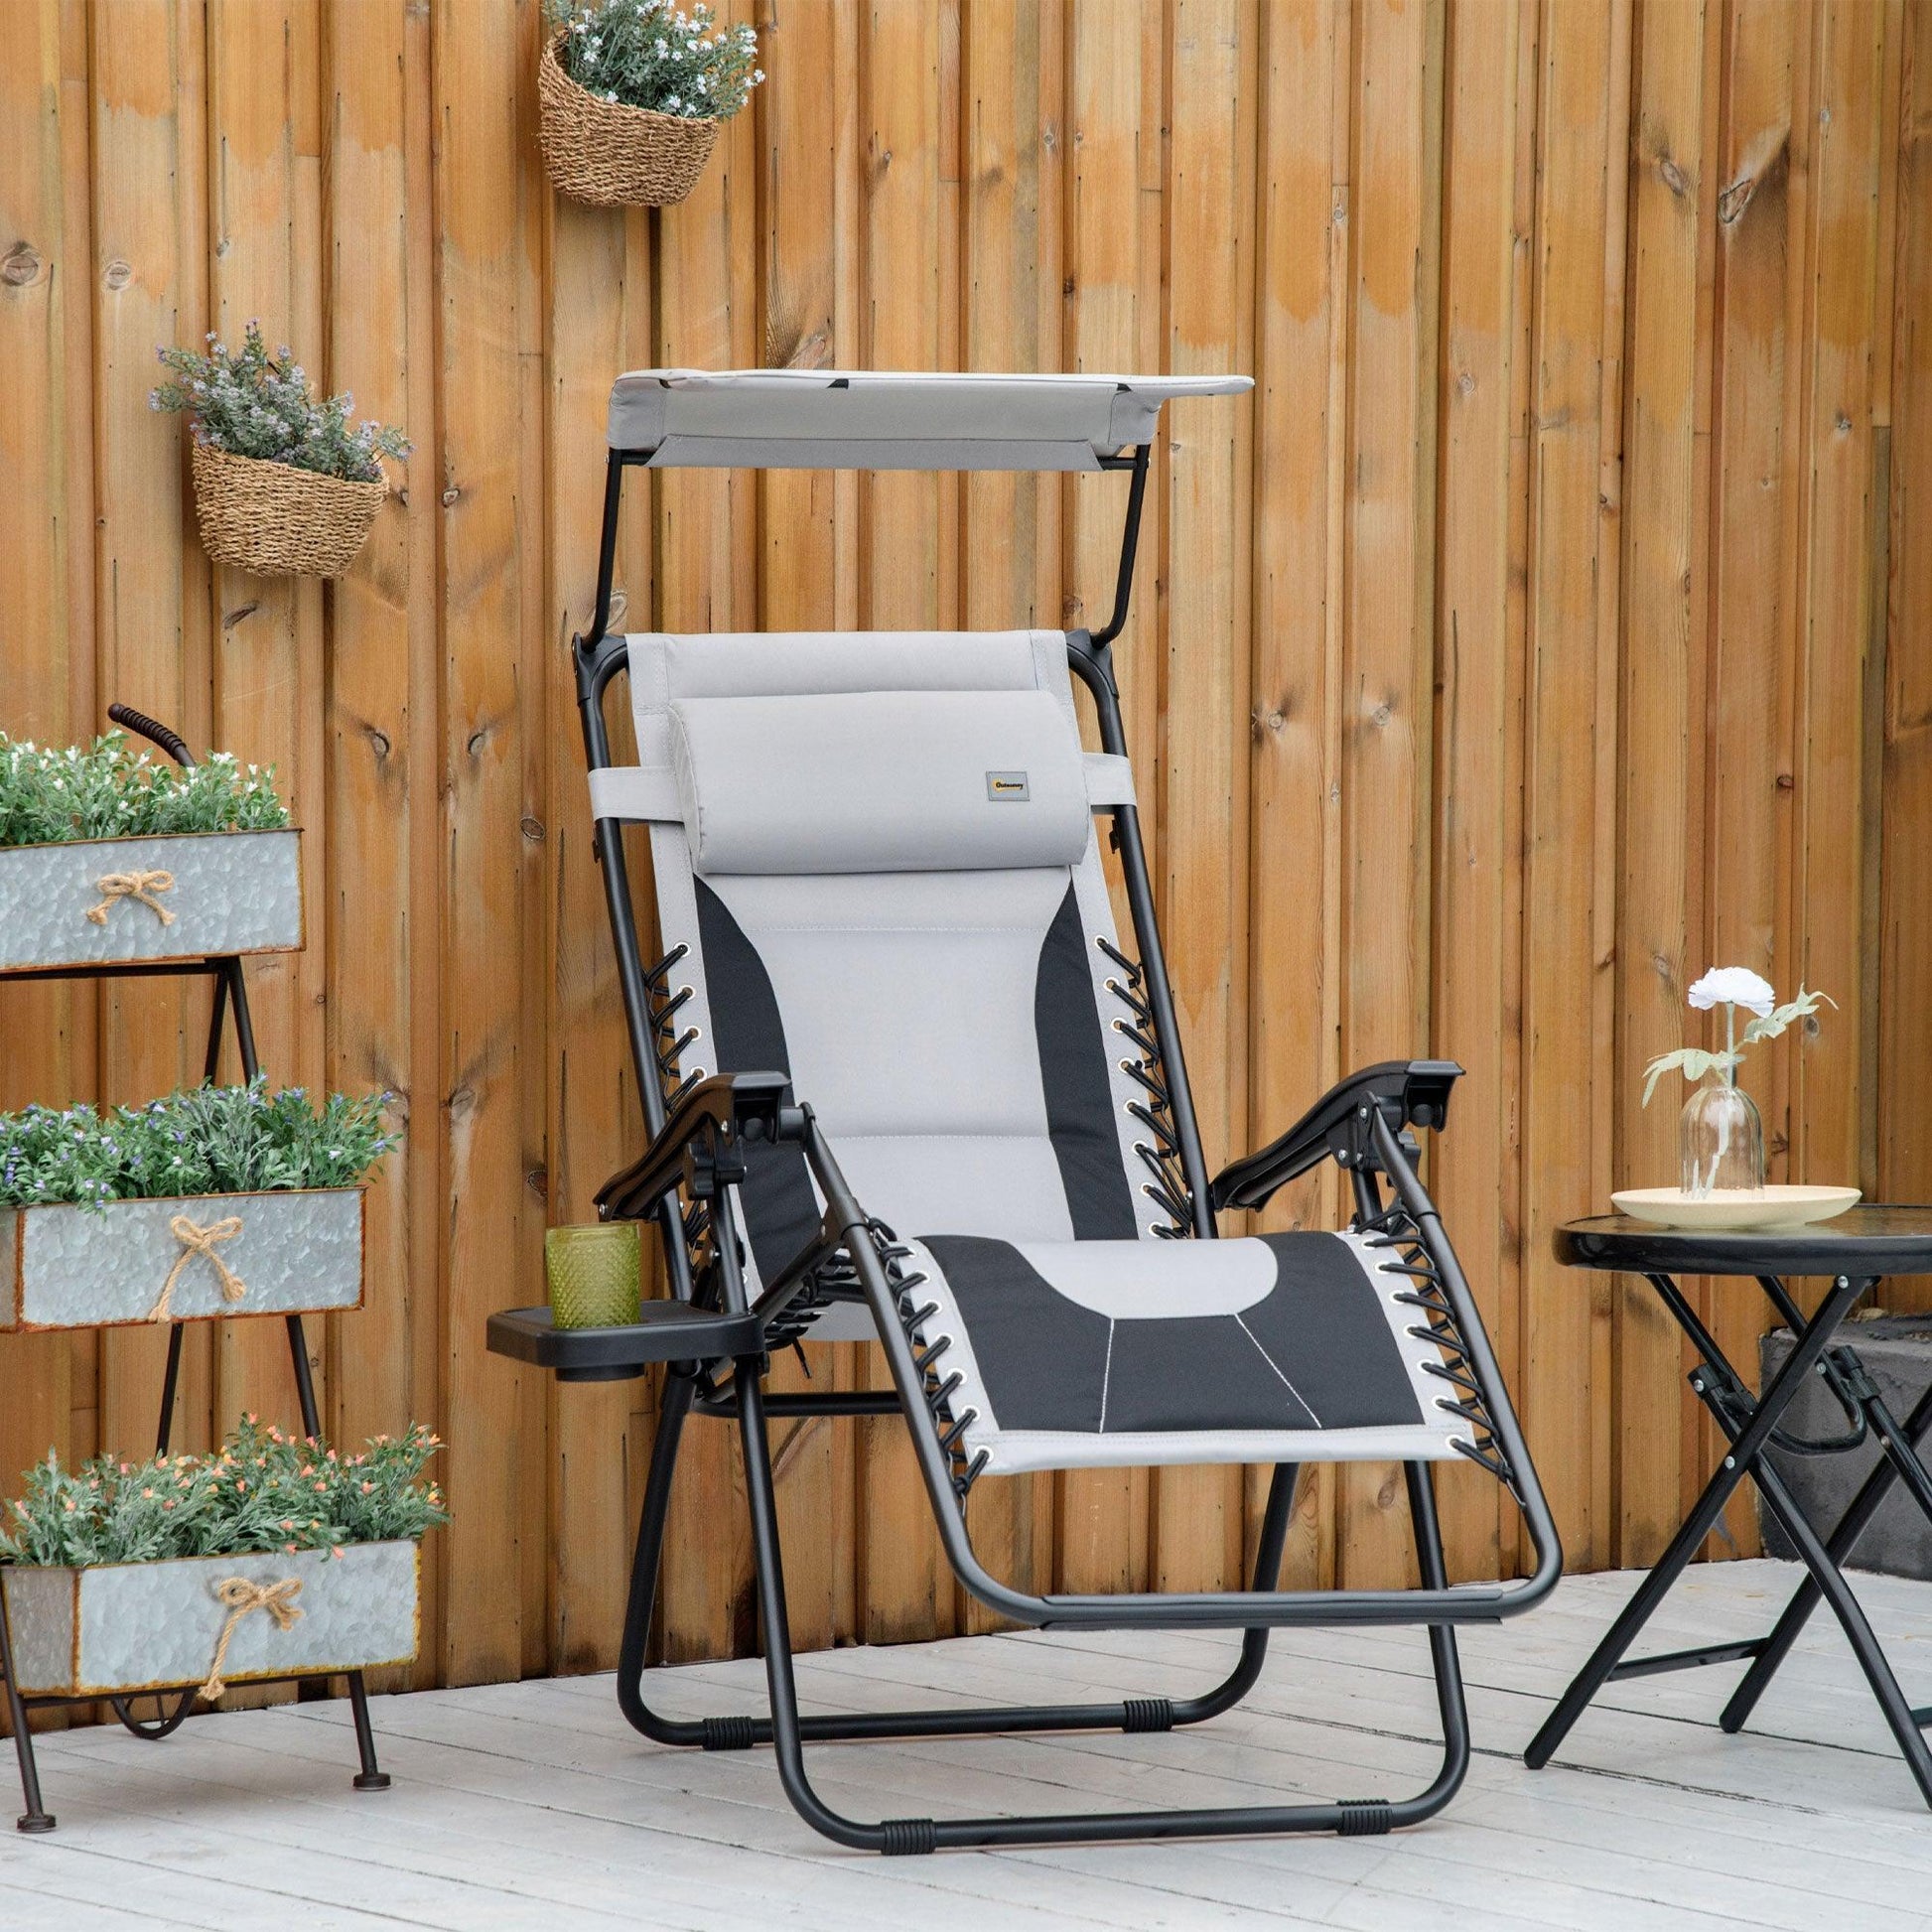 Outsunny Zero Gravity Chair with Shade Cover, Cup Holder, and Headrest - ALL4U RETAILER LTD